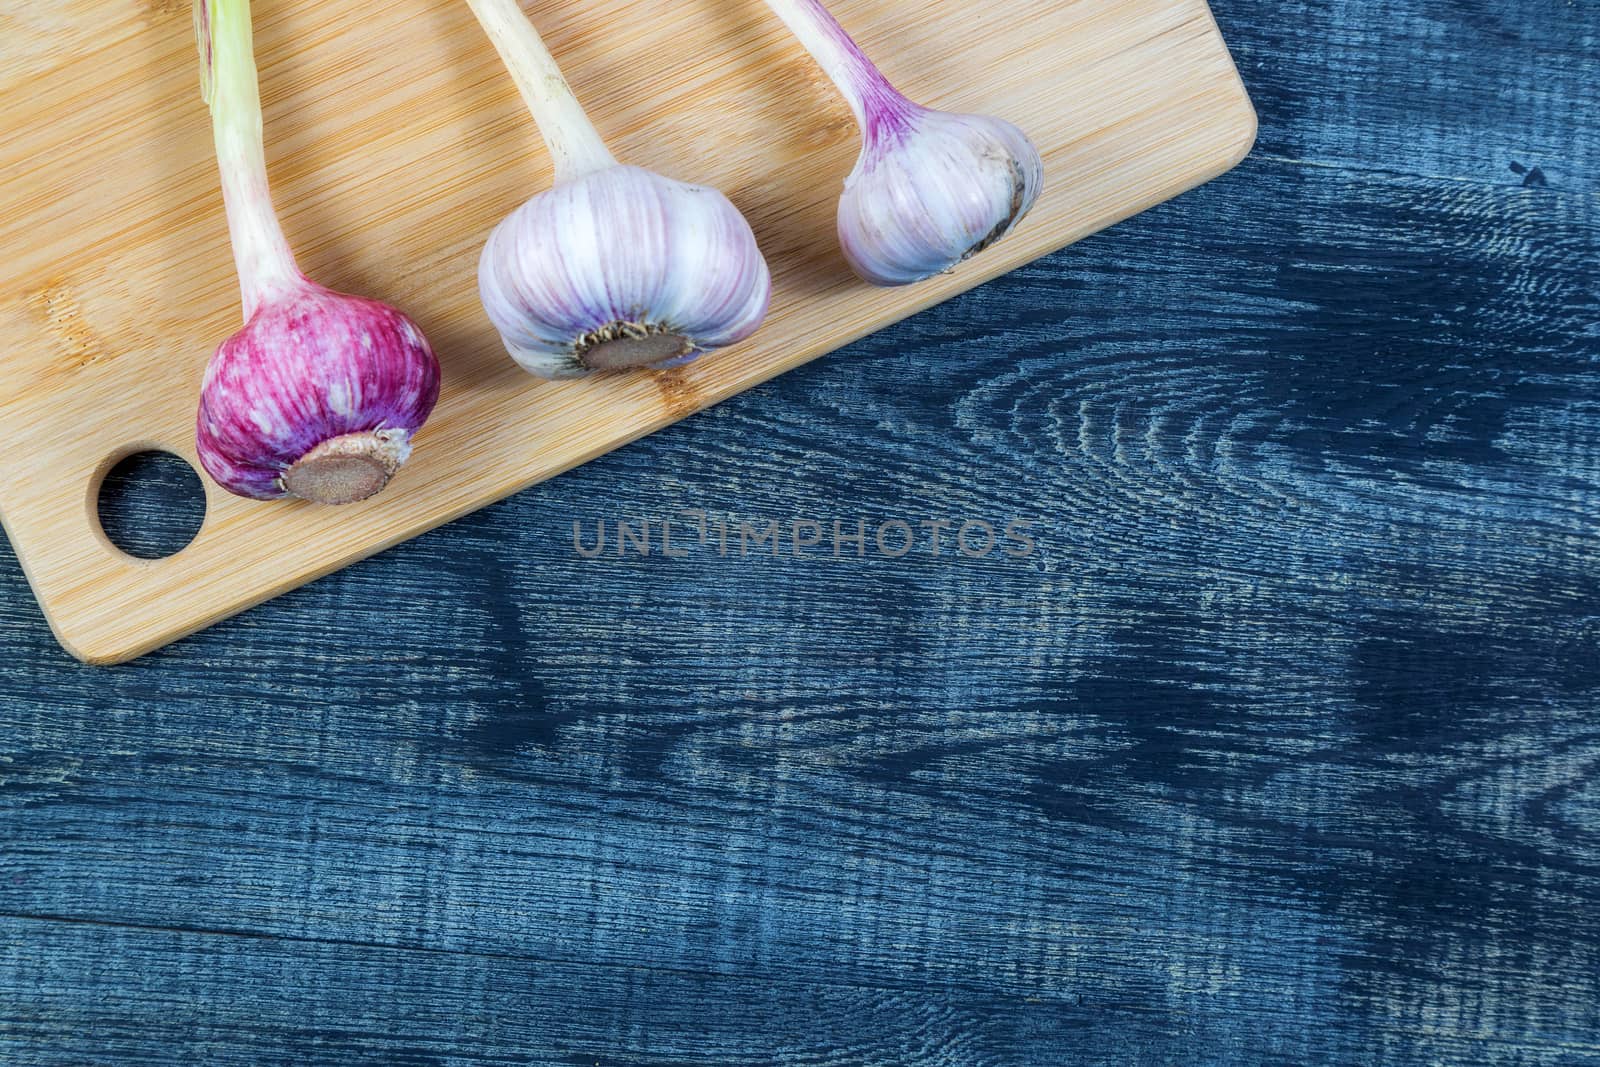 High Angle Still Life View of garlic on Wooden Cutting Board on Rustic Wood Table, copy space